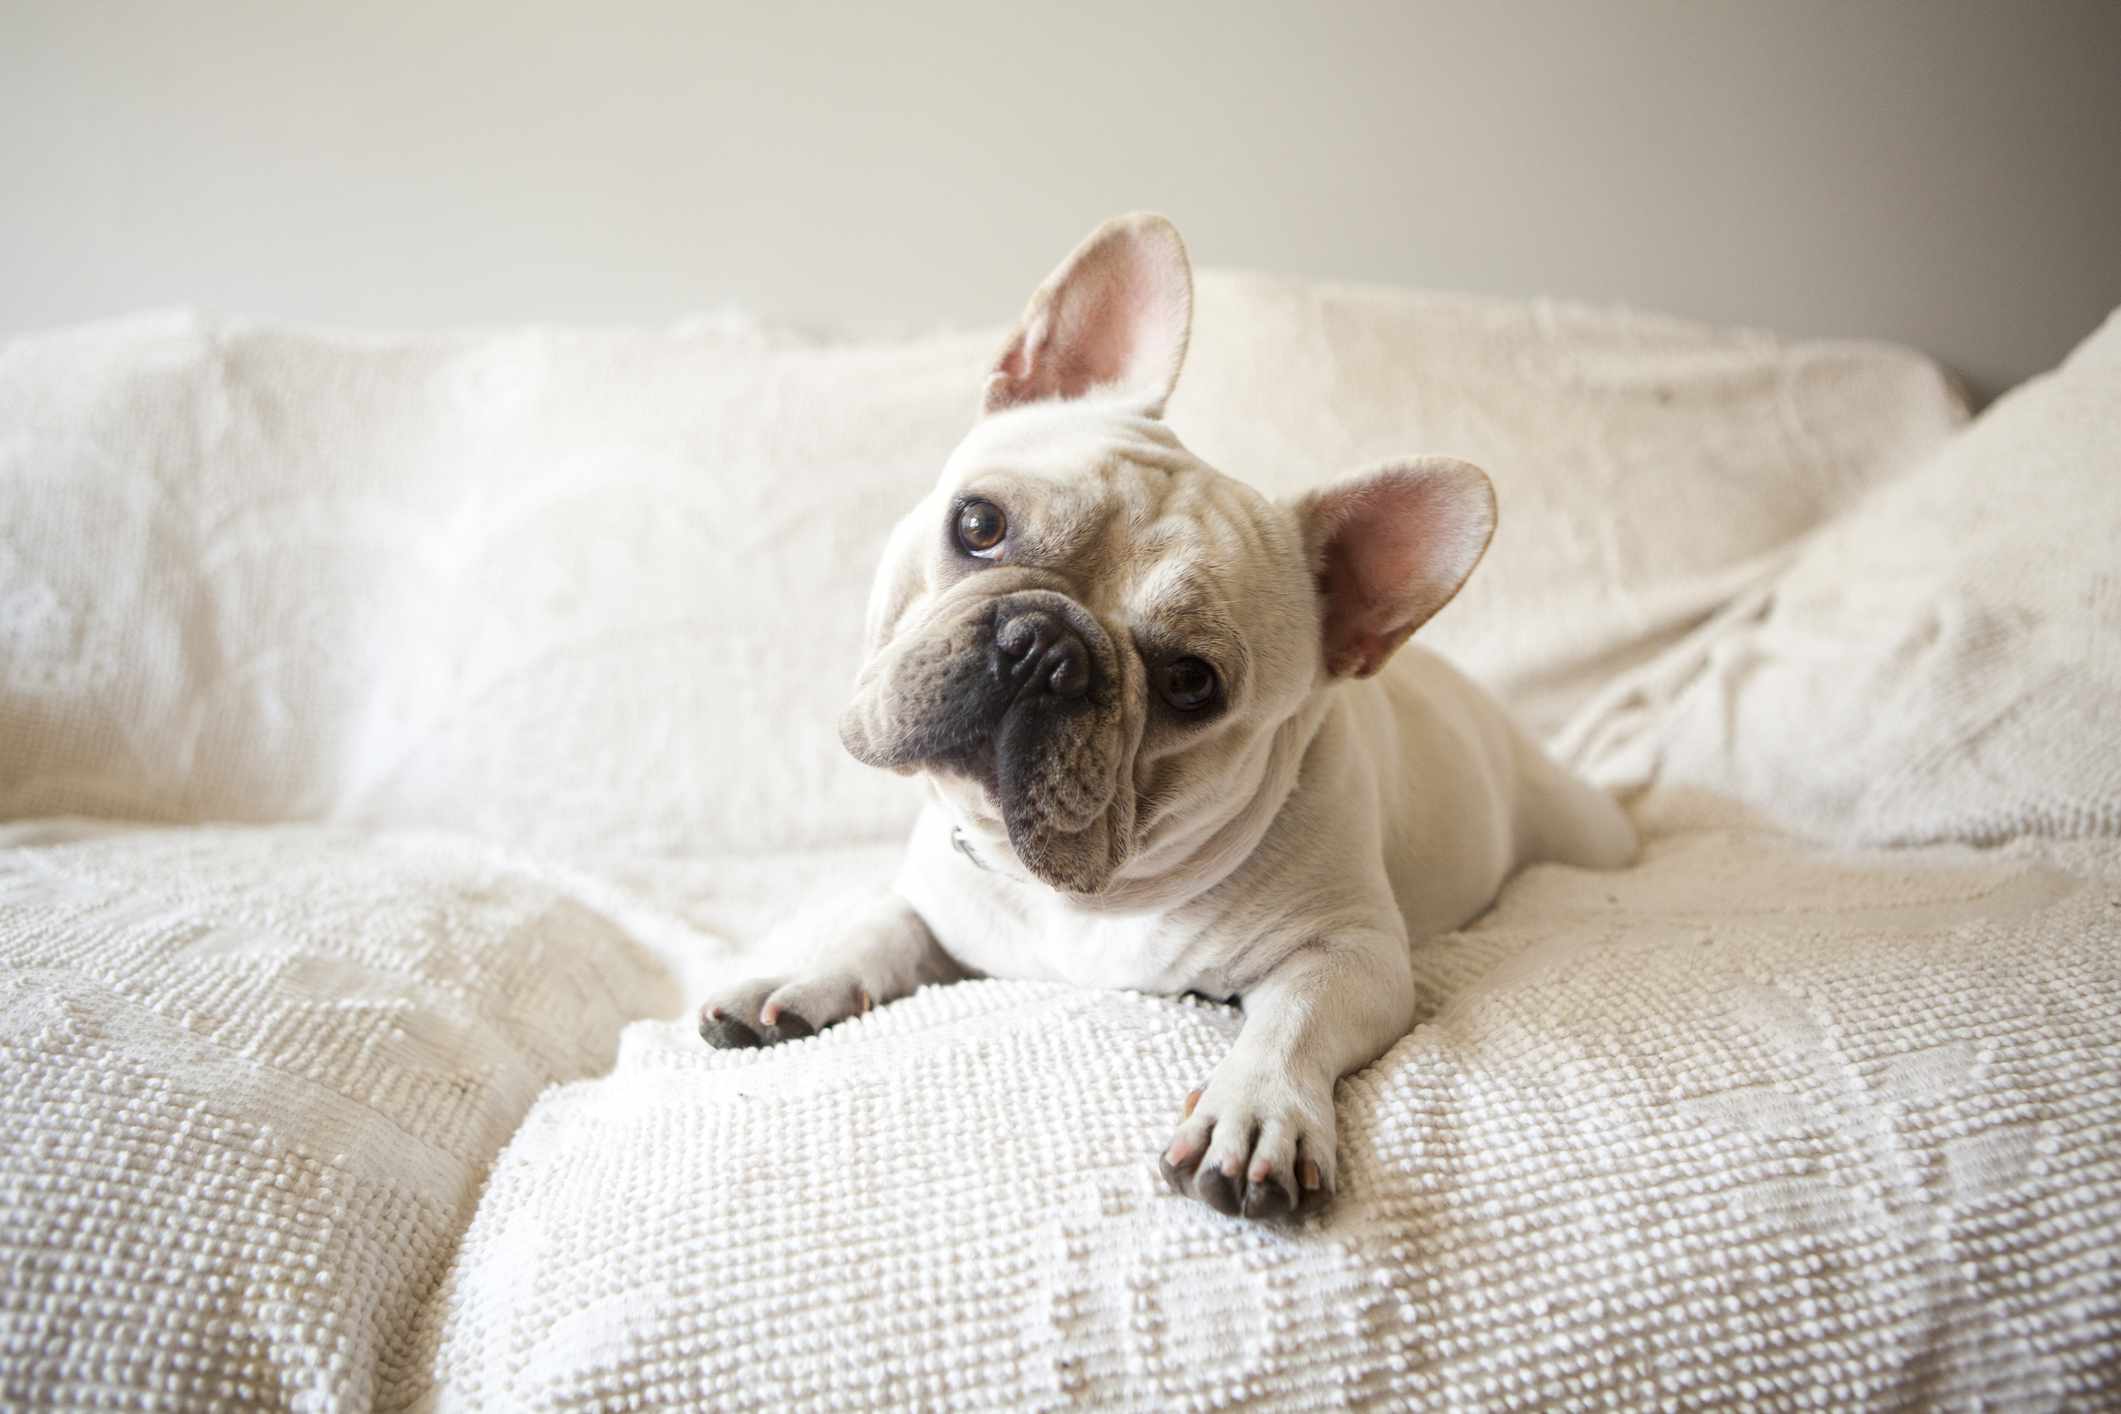 A French Bulldog lounging on a couch.